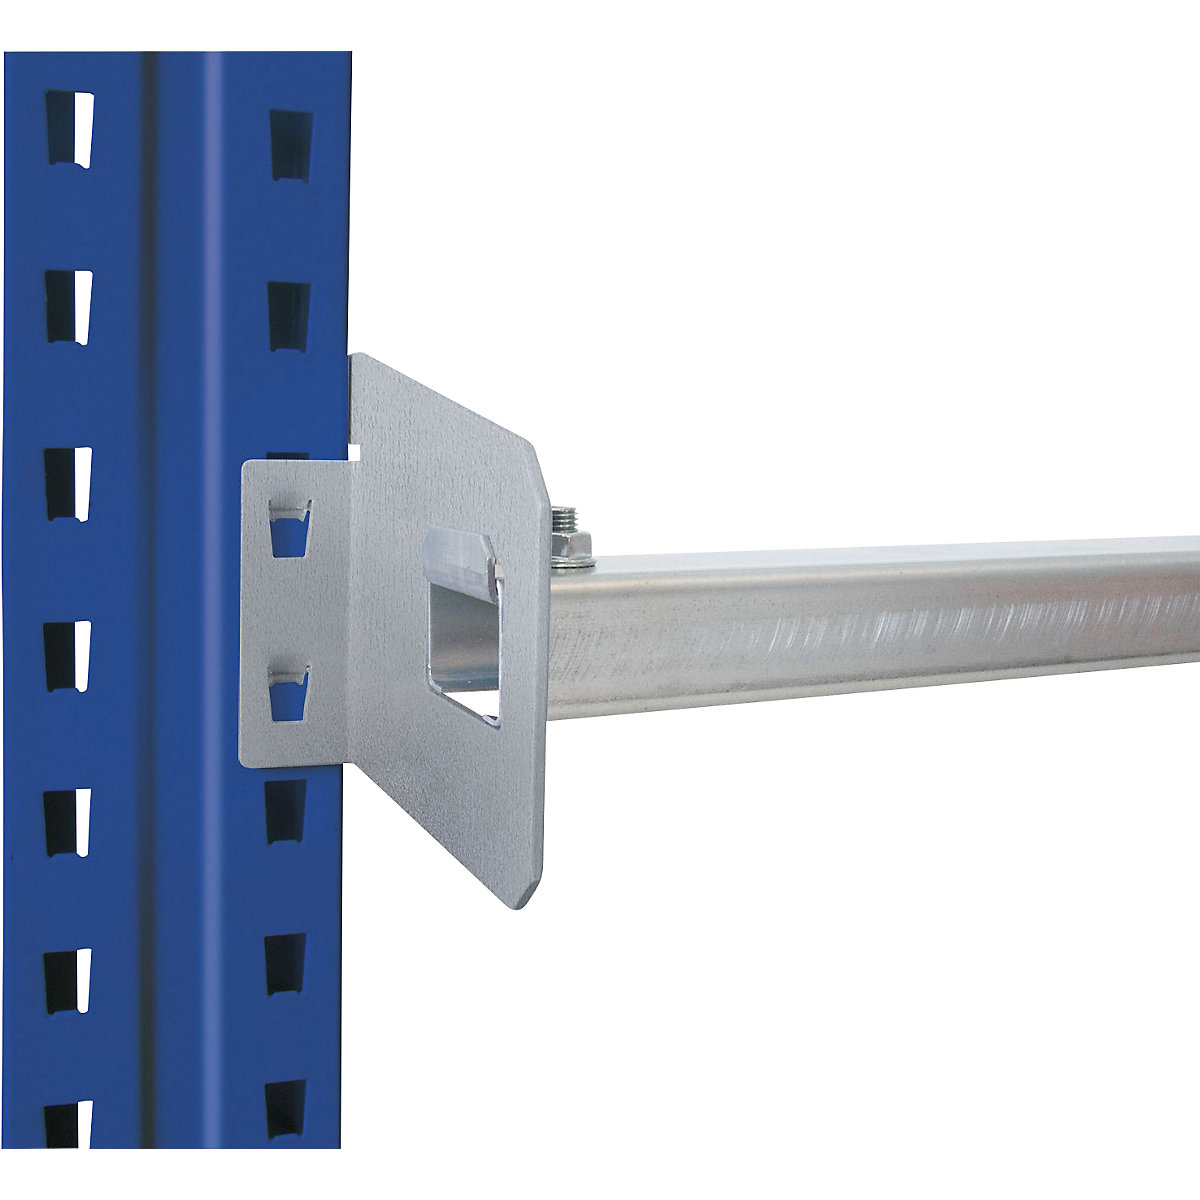 Push-through stop, incl. mounting materials - SCHULTE